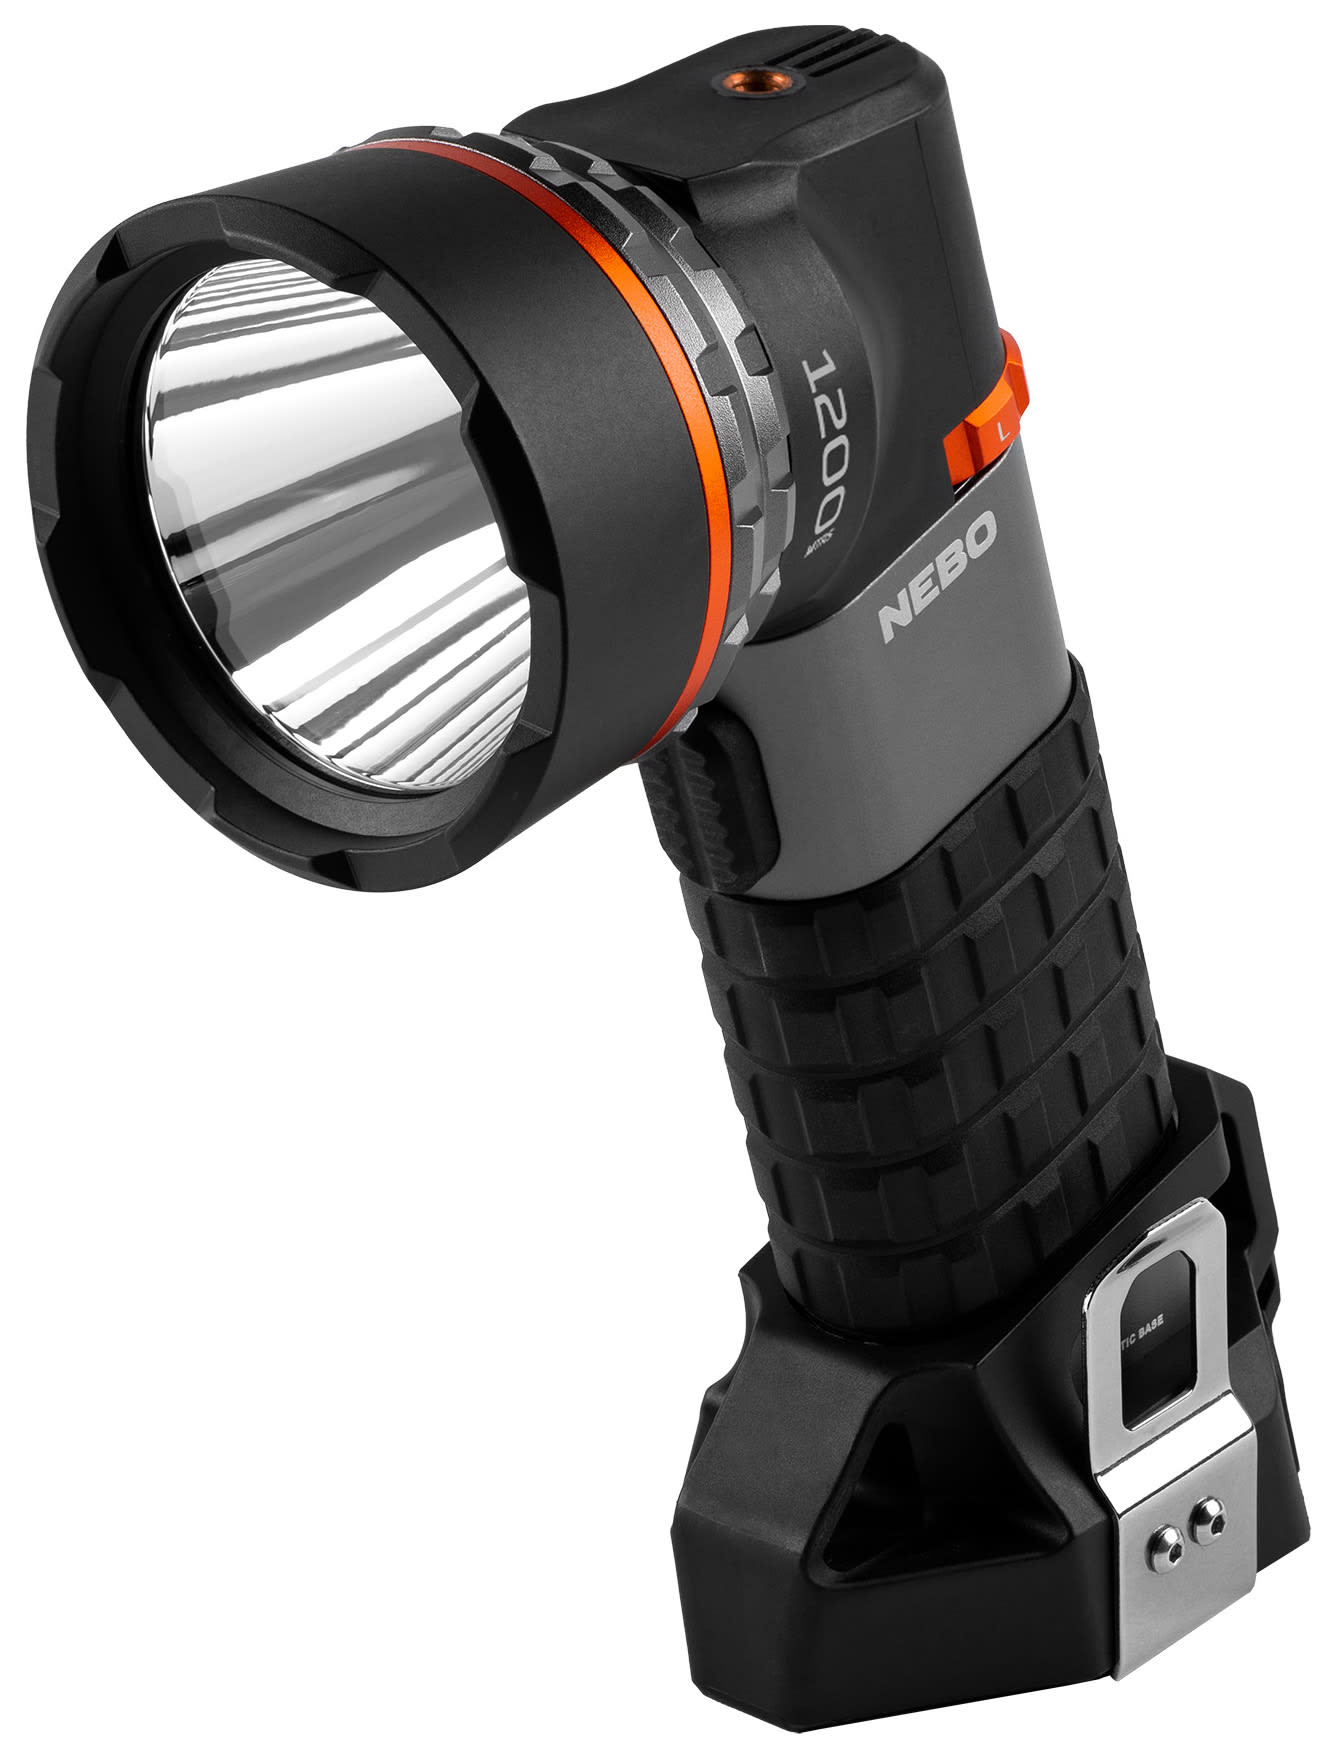 Nebo Luxtreme SL75 Rechargeable Spotlight